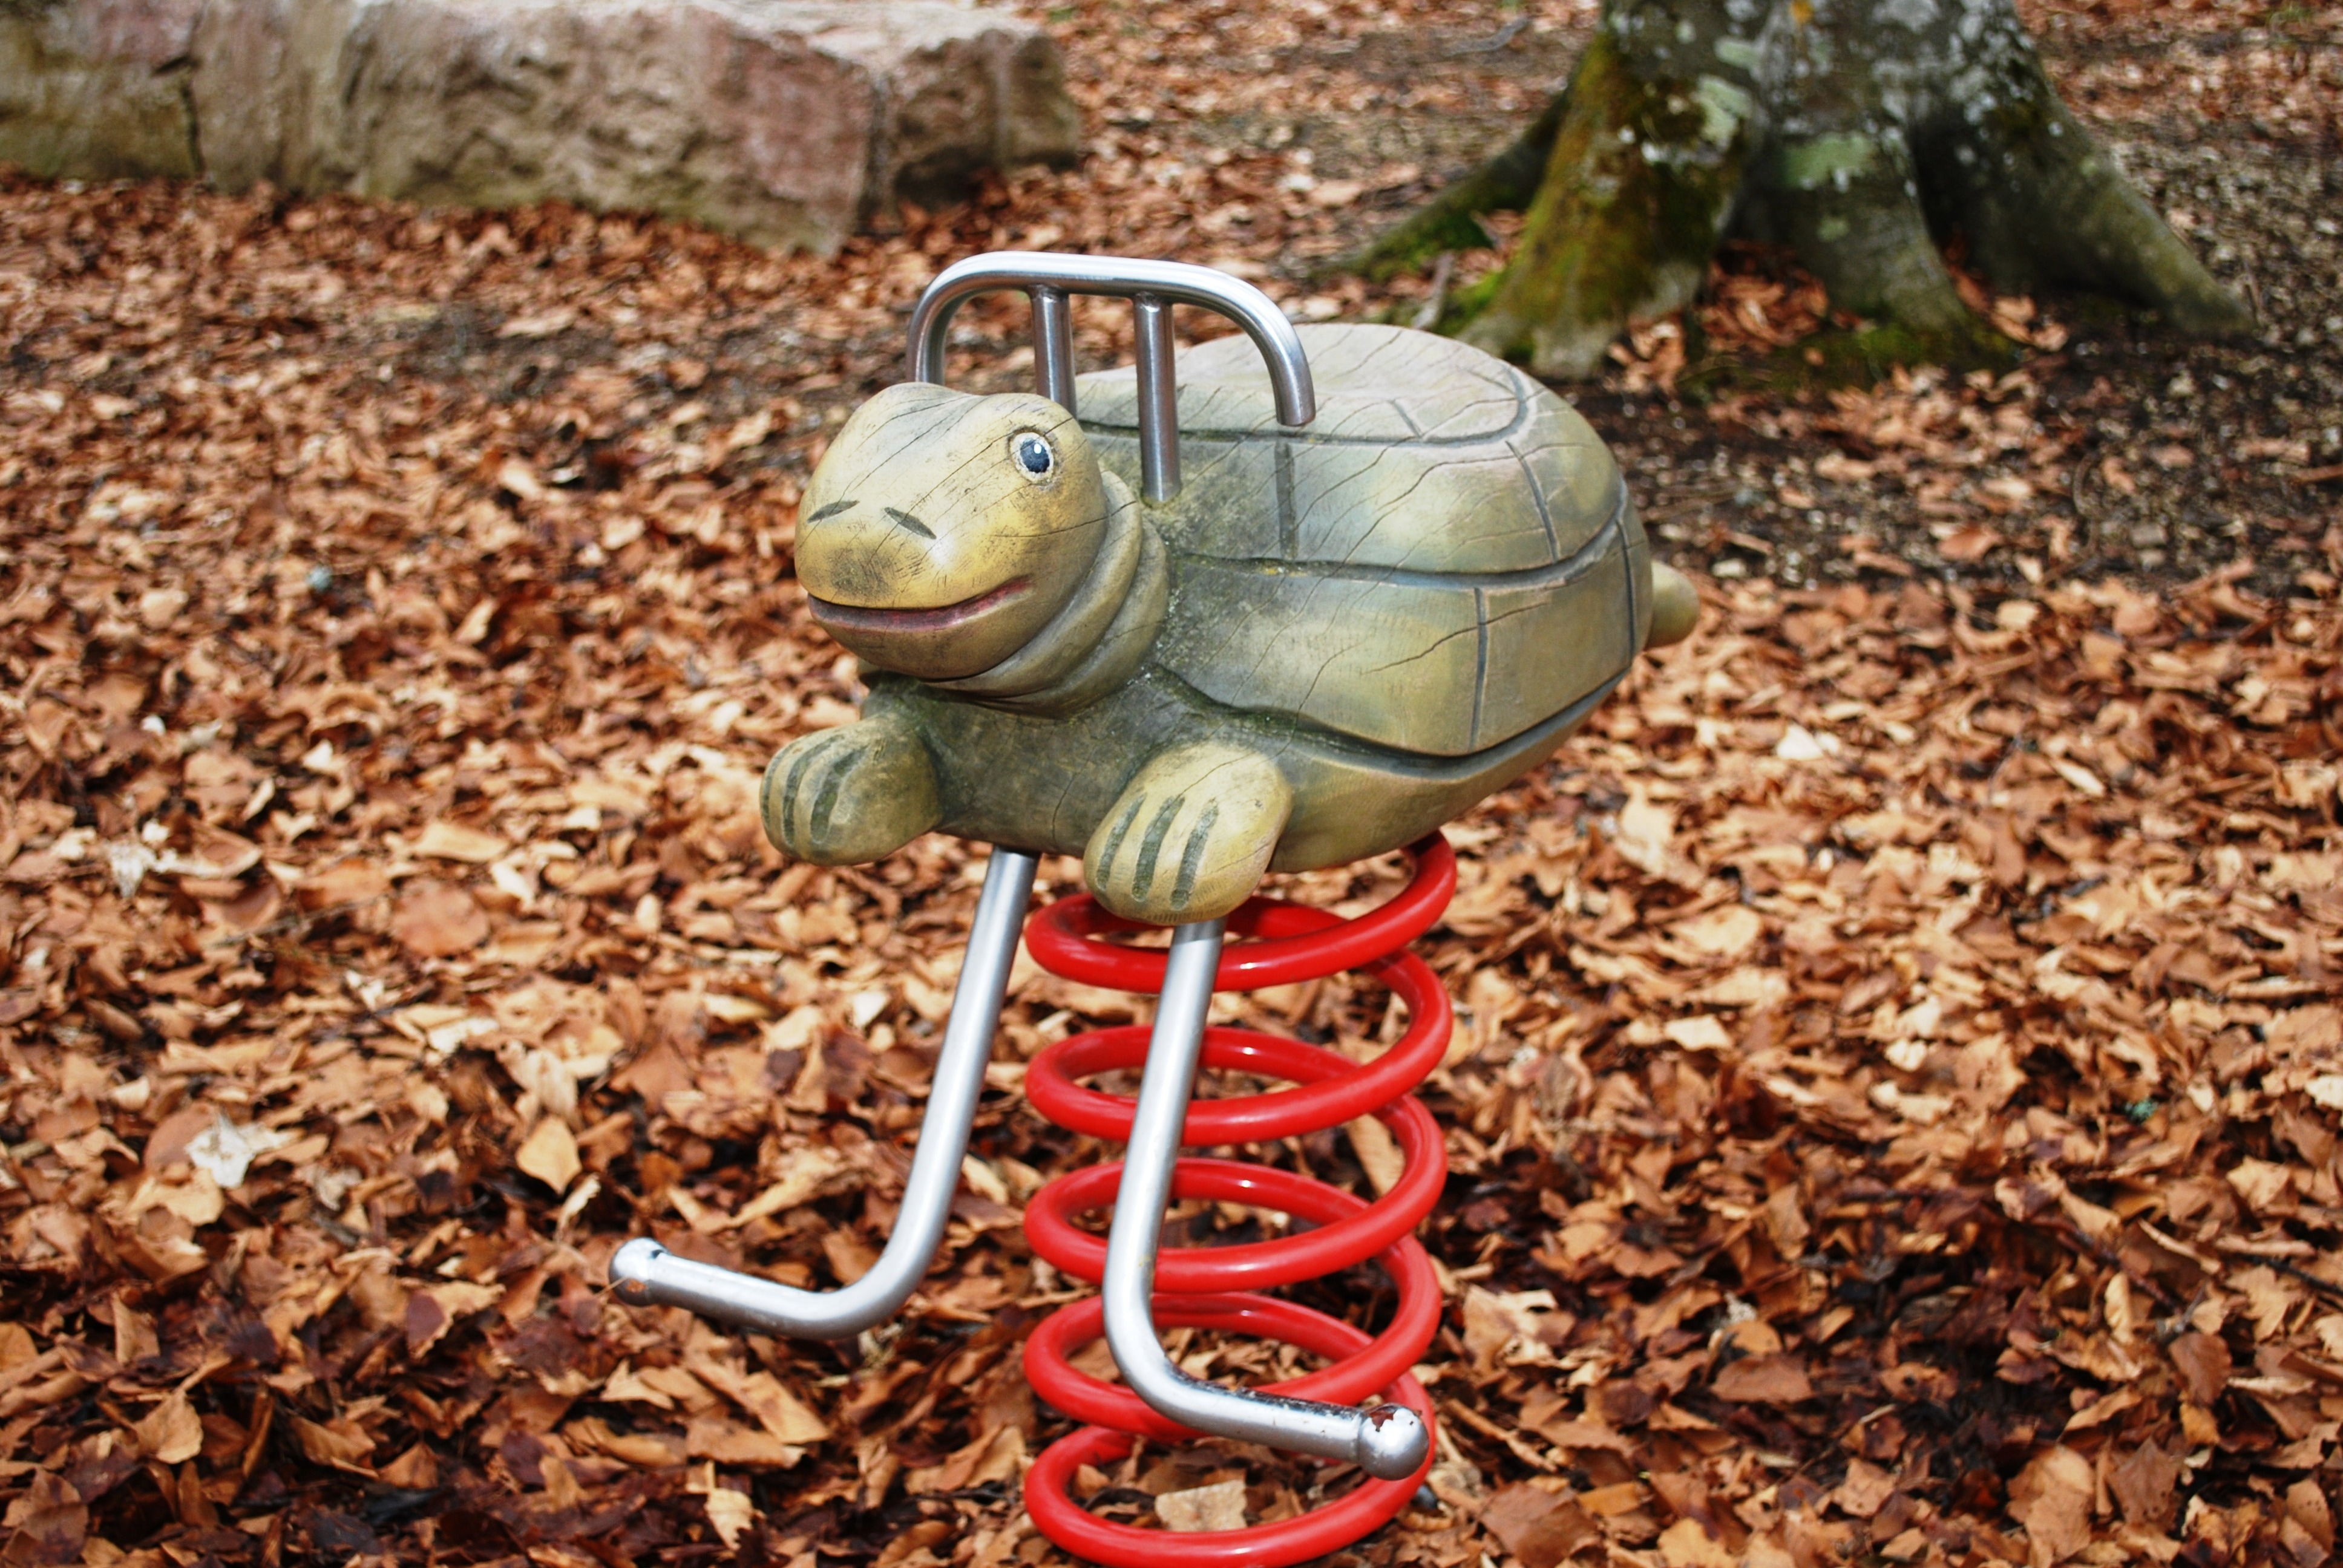 red and grey turtle sprint ride on toy